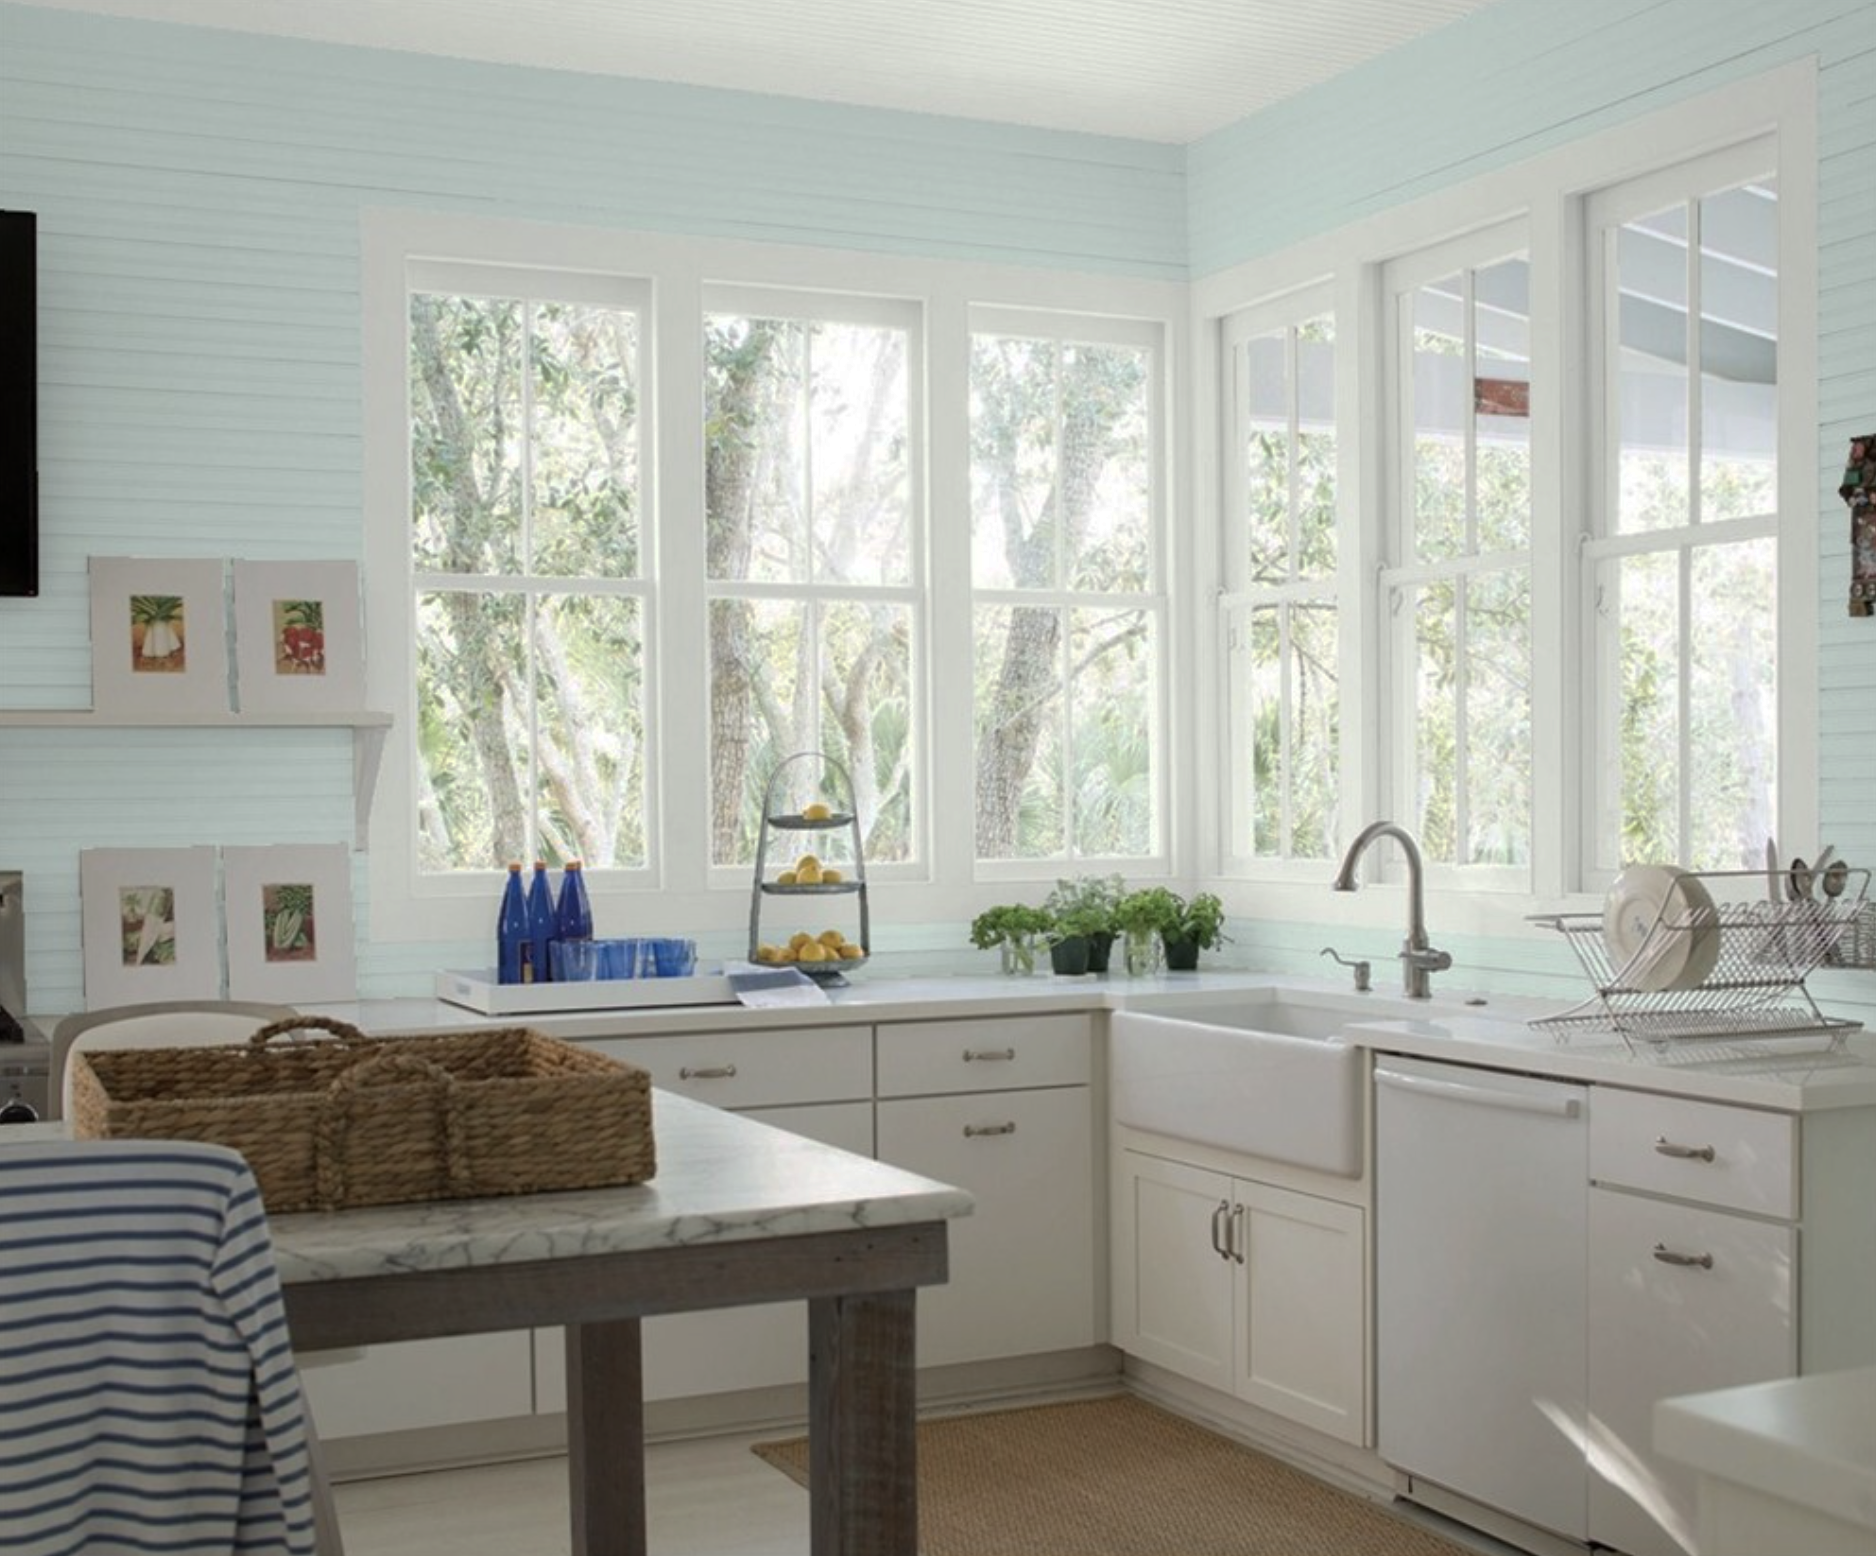 Brightly lit kitchen in Benjamin Moore Woodlawn Blue HC-147 with Ceiling and Trim in Paper White